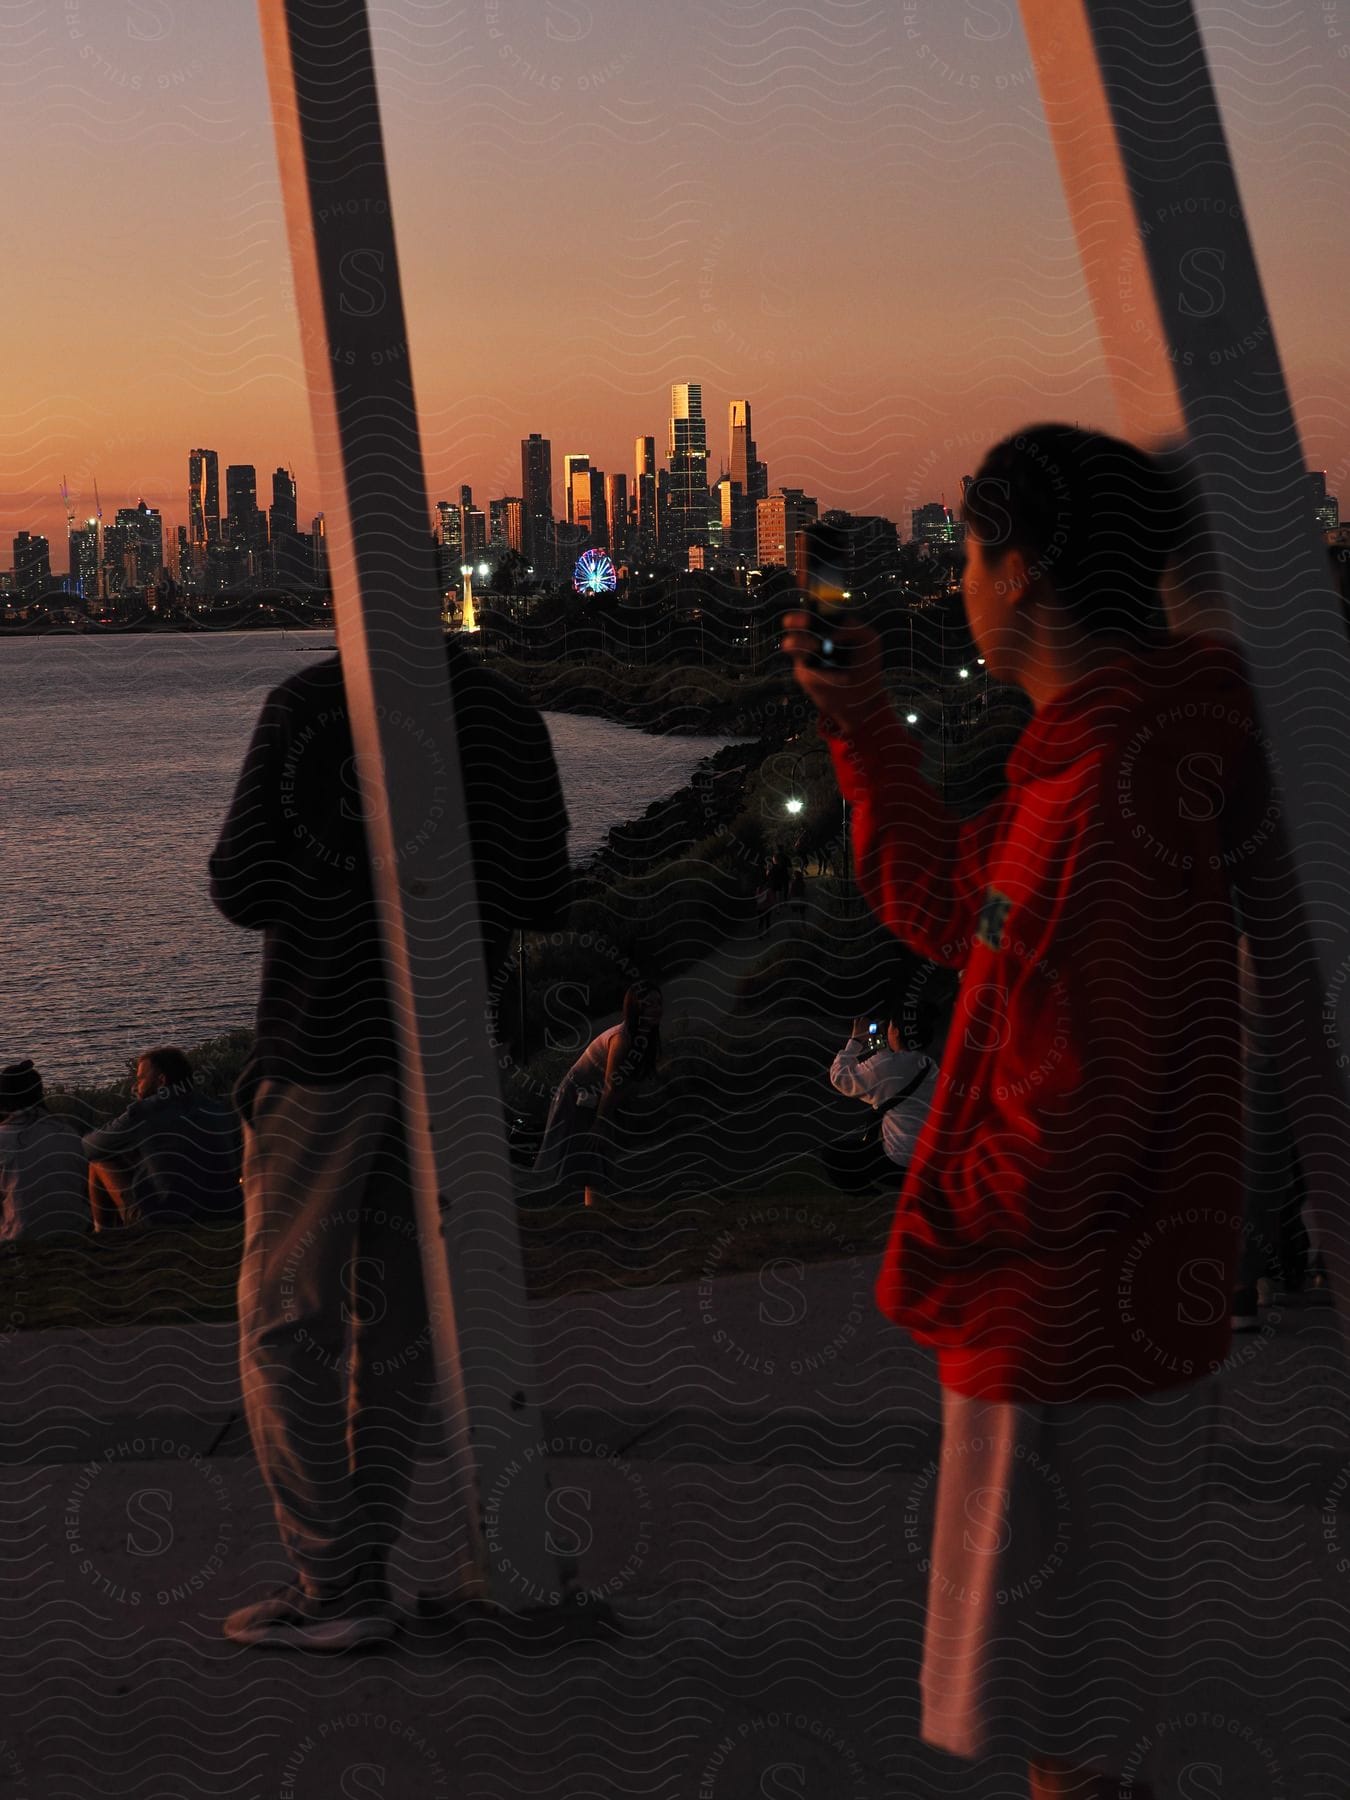 During sunset, people enjoy the view of a city skyline from a park.